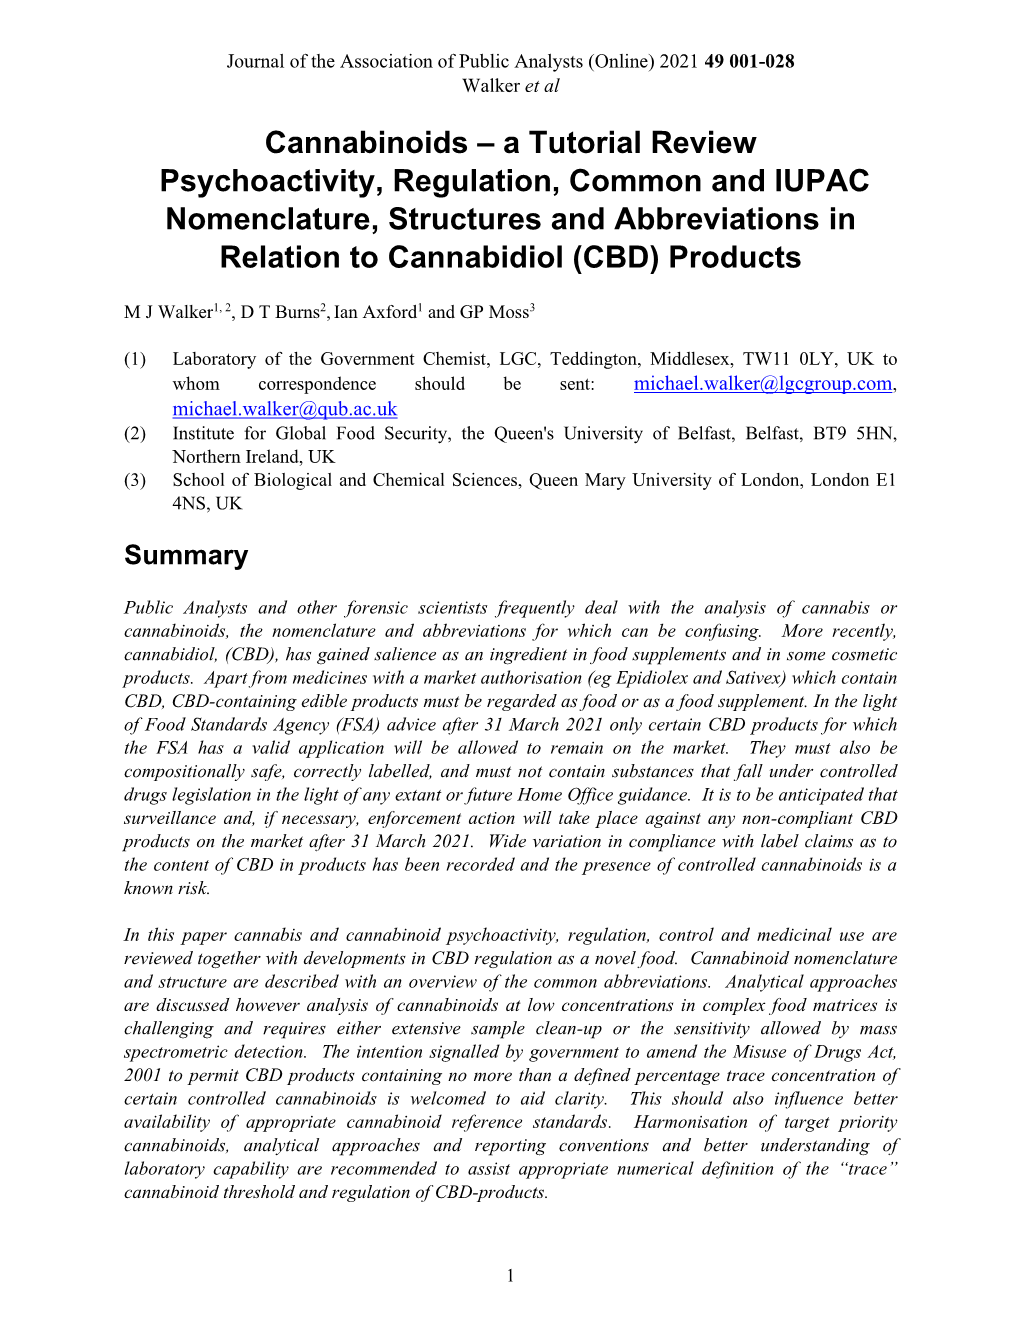 Cannabinoids – a Tutorial Review Psychoactivity, Regulation, Common and IUPAC Nomenclature, Structures and Abbreviations in Relation to Cannabidiol (CBD) Products